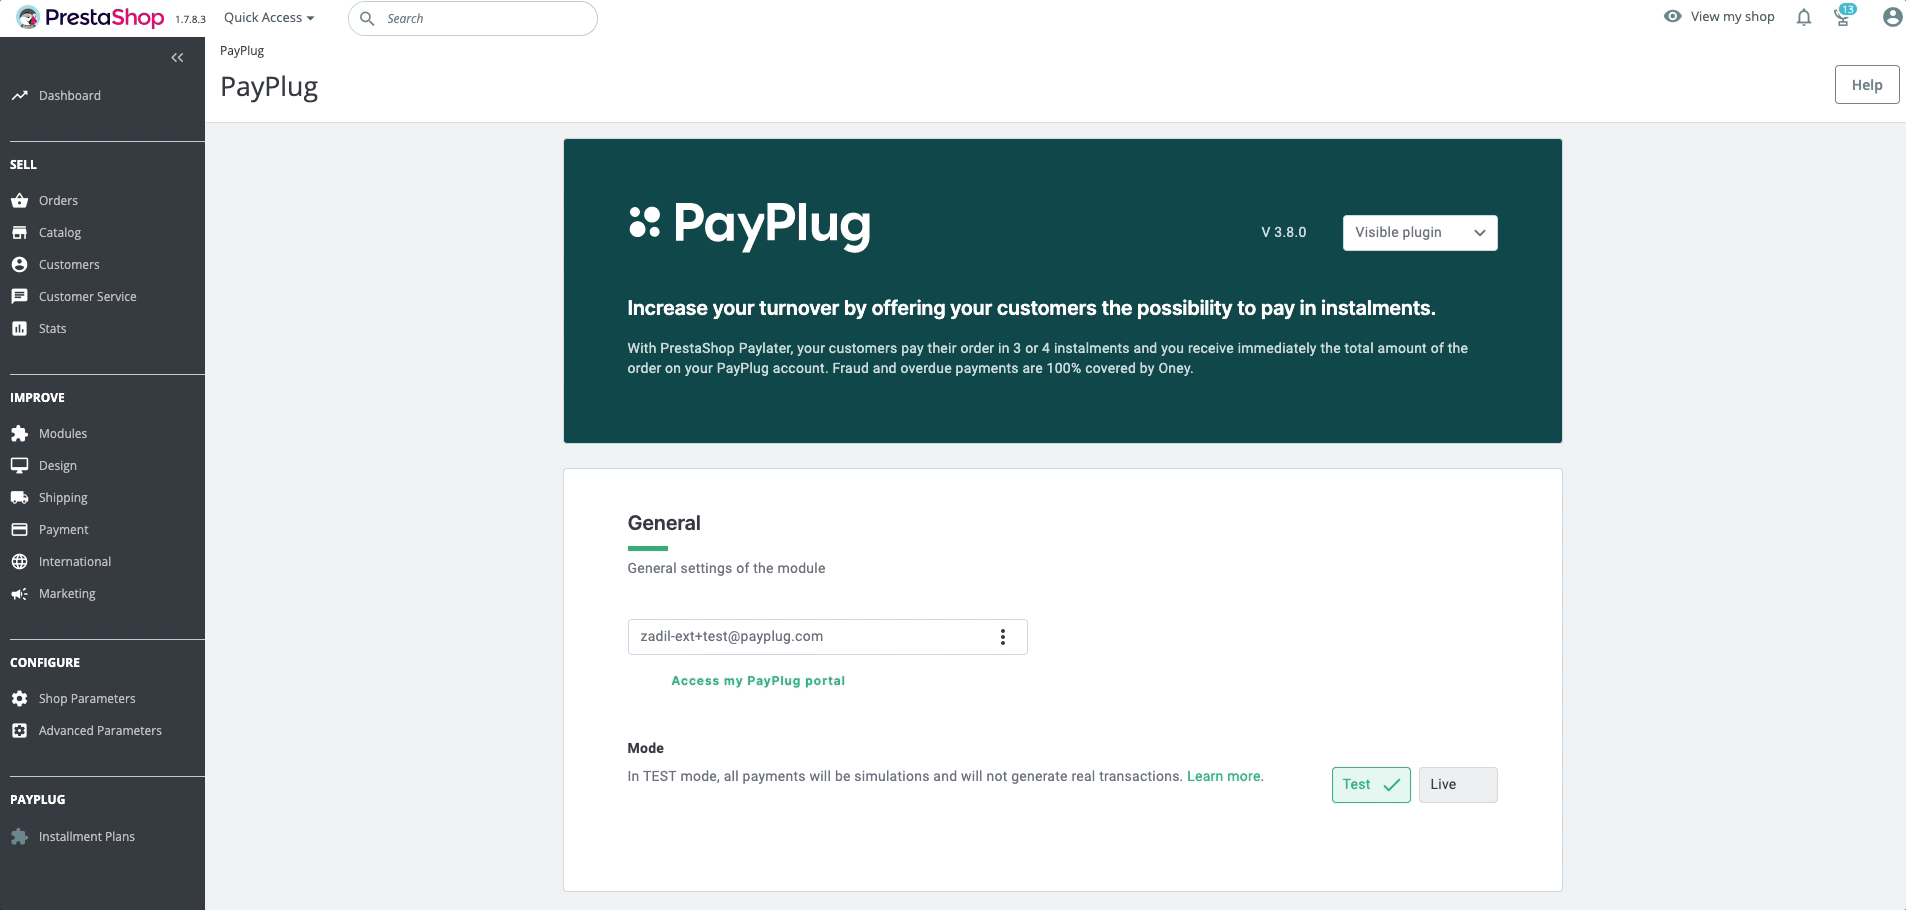 ApllePay_activation.gif